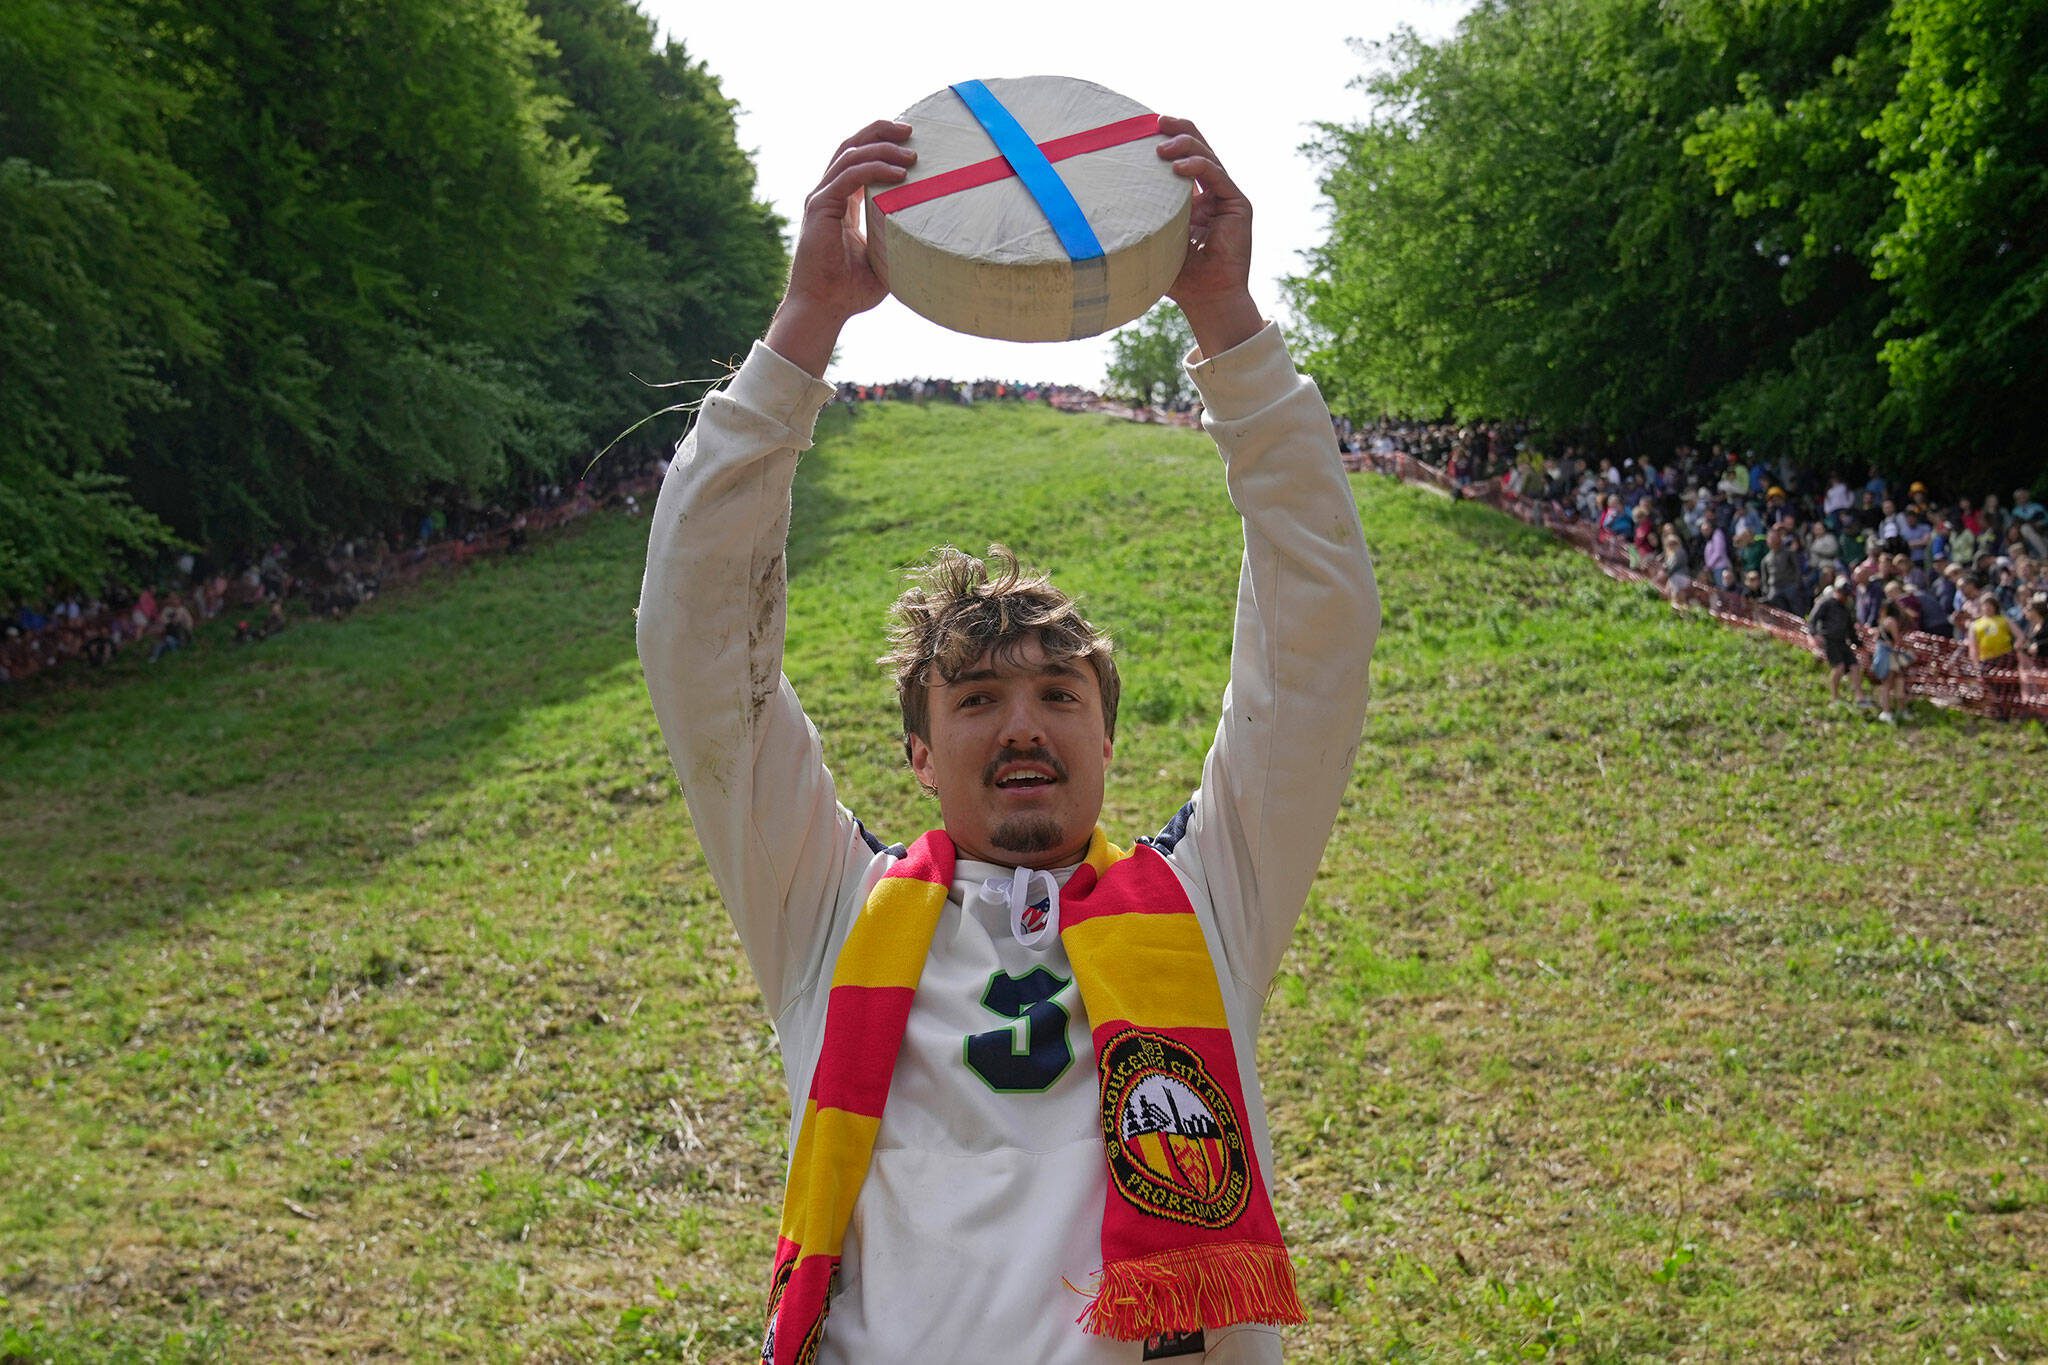 Cooper Cummings celebrates after winning a men’s downhill during the Cheese Rolling contest at Cooper’s Hill in Brockworth, Gloucestershire, Monday May 29, 2023. The Cooper’s Hill Cheese-Rolling and Wake is an annual event where participants race down the 200-yard (180 m) long hill chasing a wheel of double gloucester cheese. (AP Photo/Kin Cheung)